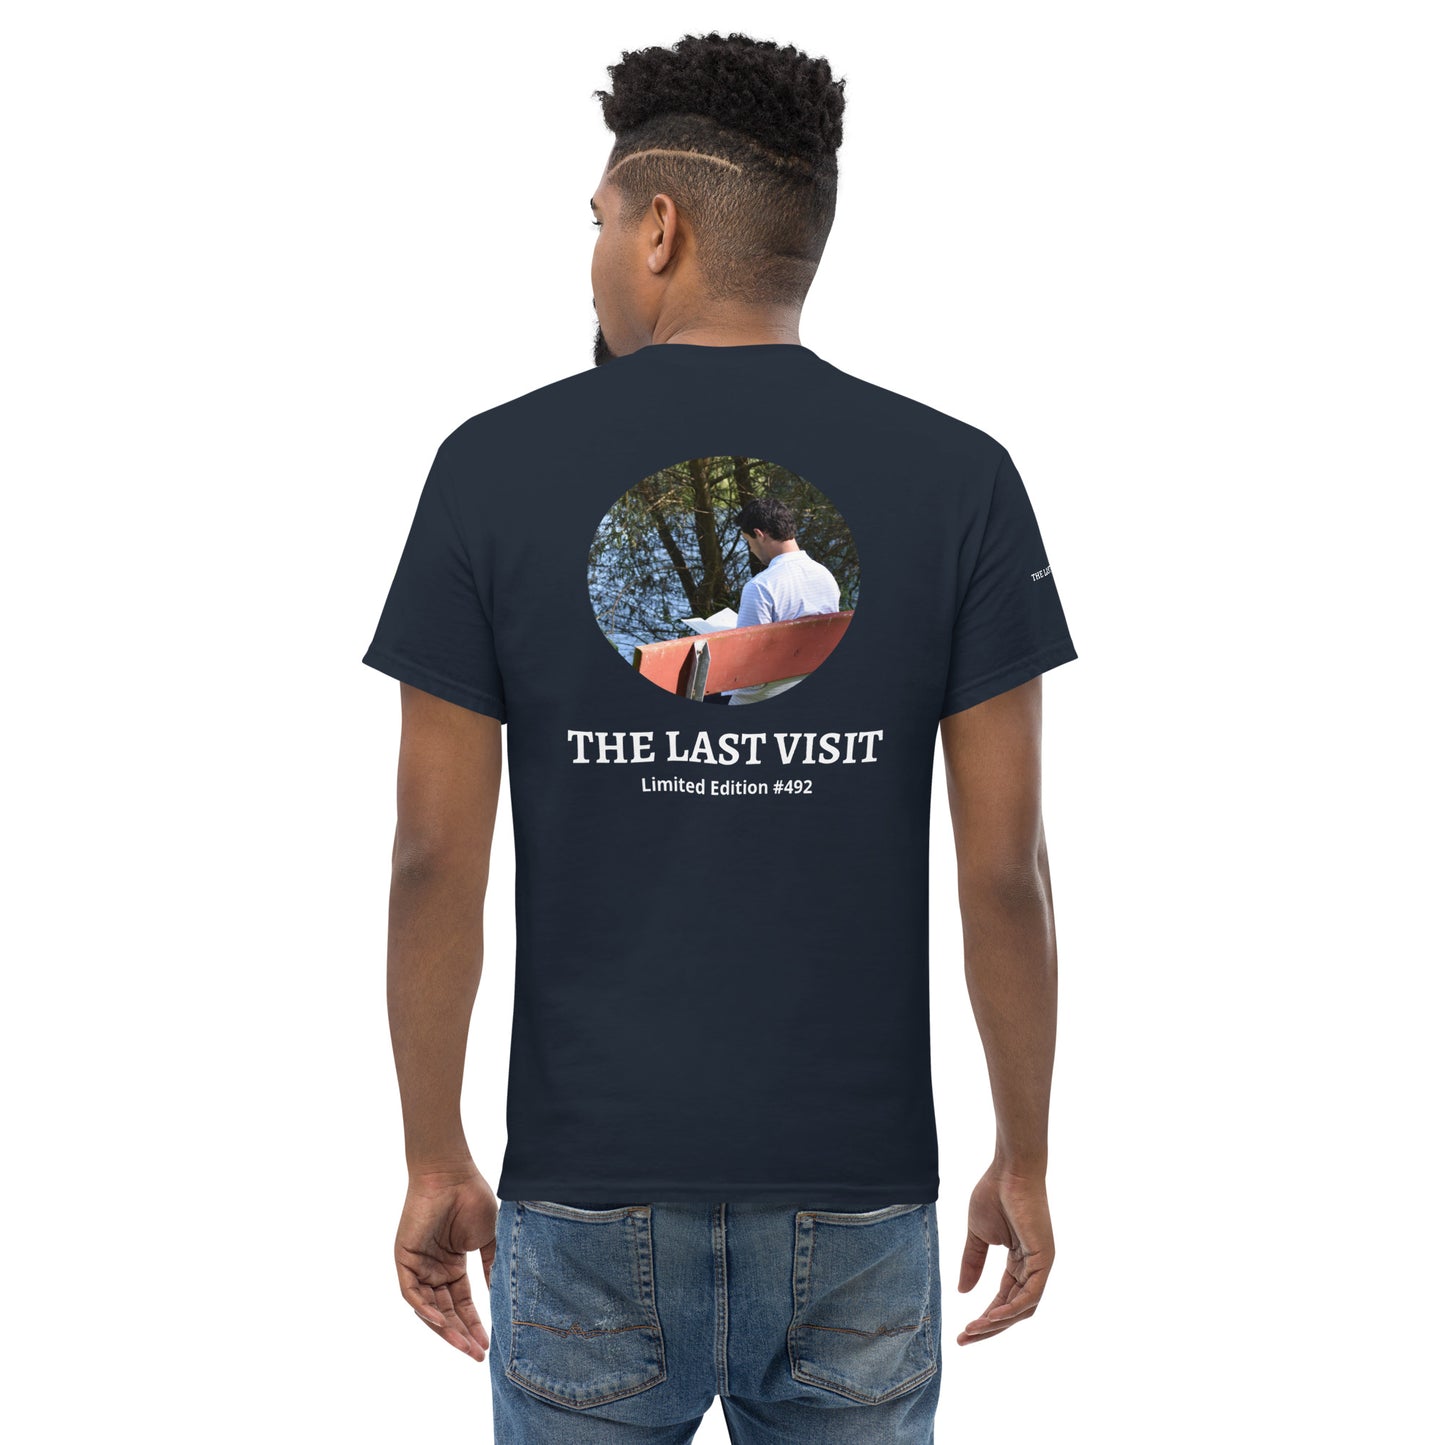 The Last Visit - Limited Edition